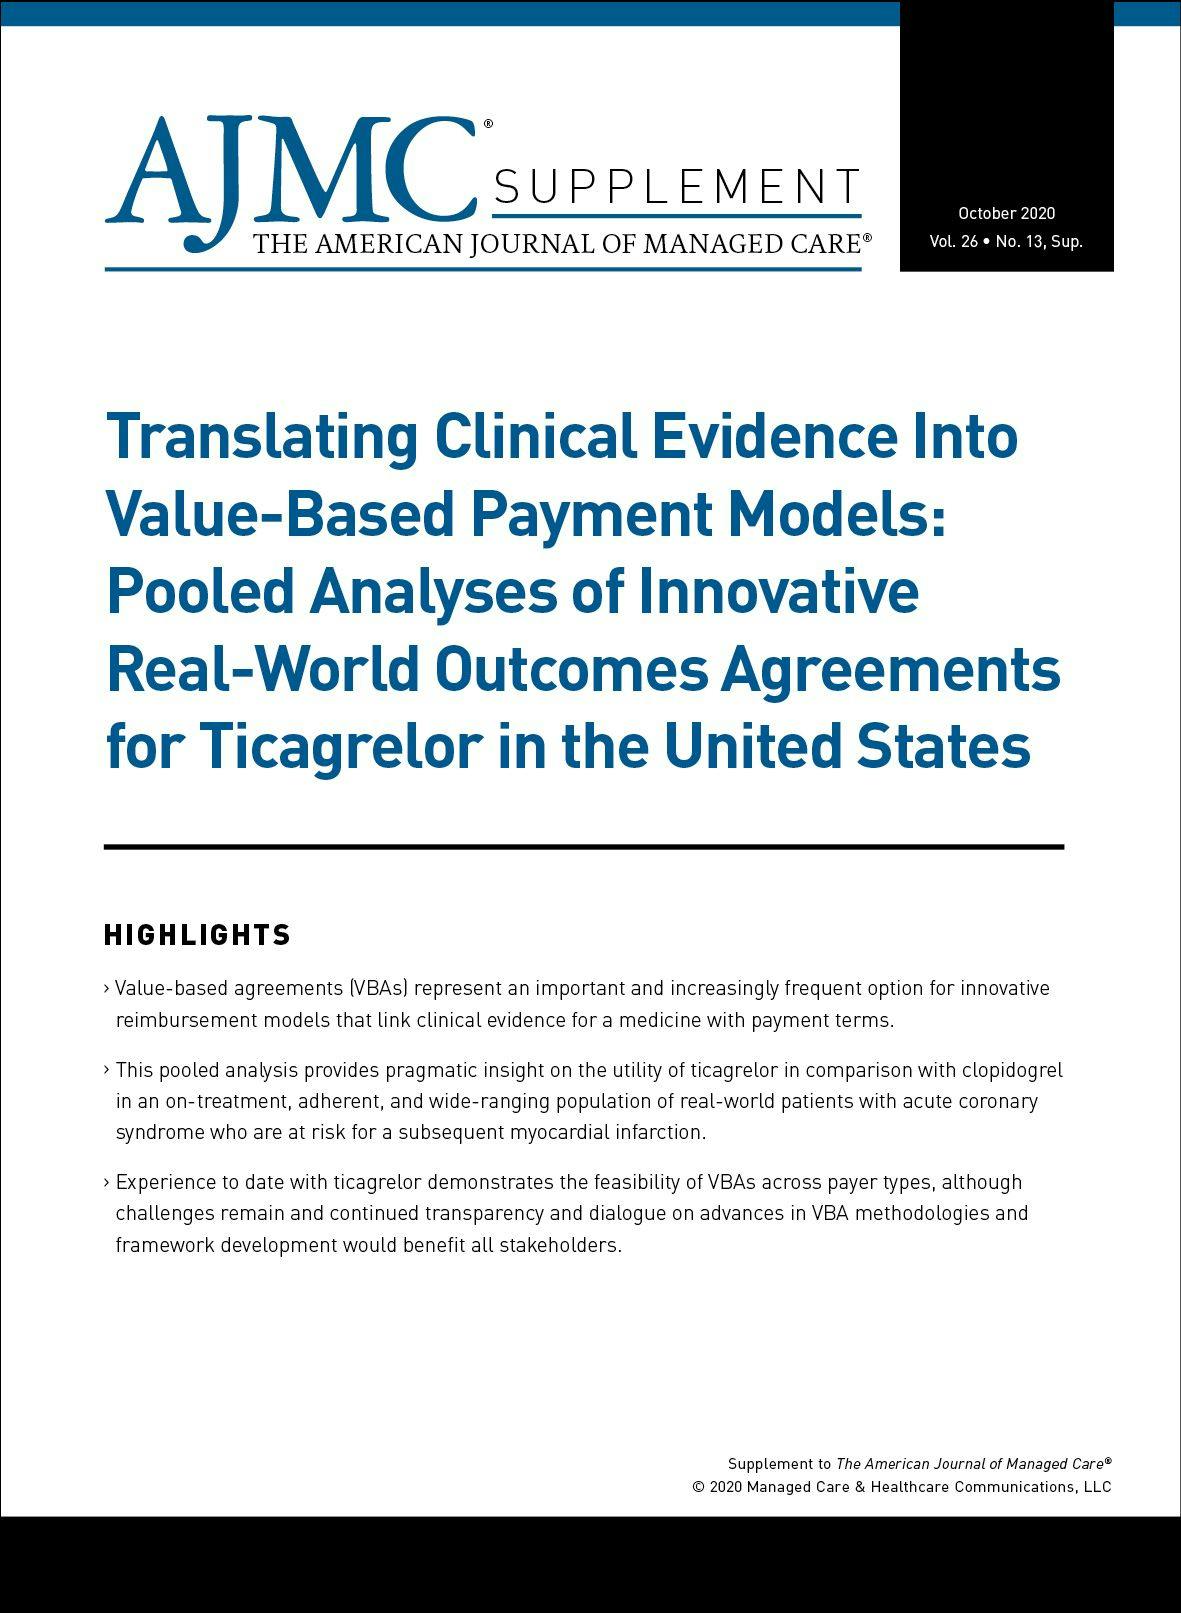 Translating Clinical Evidence Into Value-Based Payment Models: Pooled Analyses of Innovative Real-World Outcomes Agreements for Ticagrelor in the United States